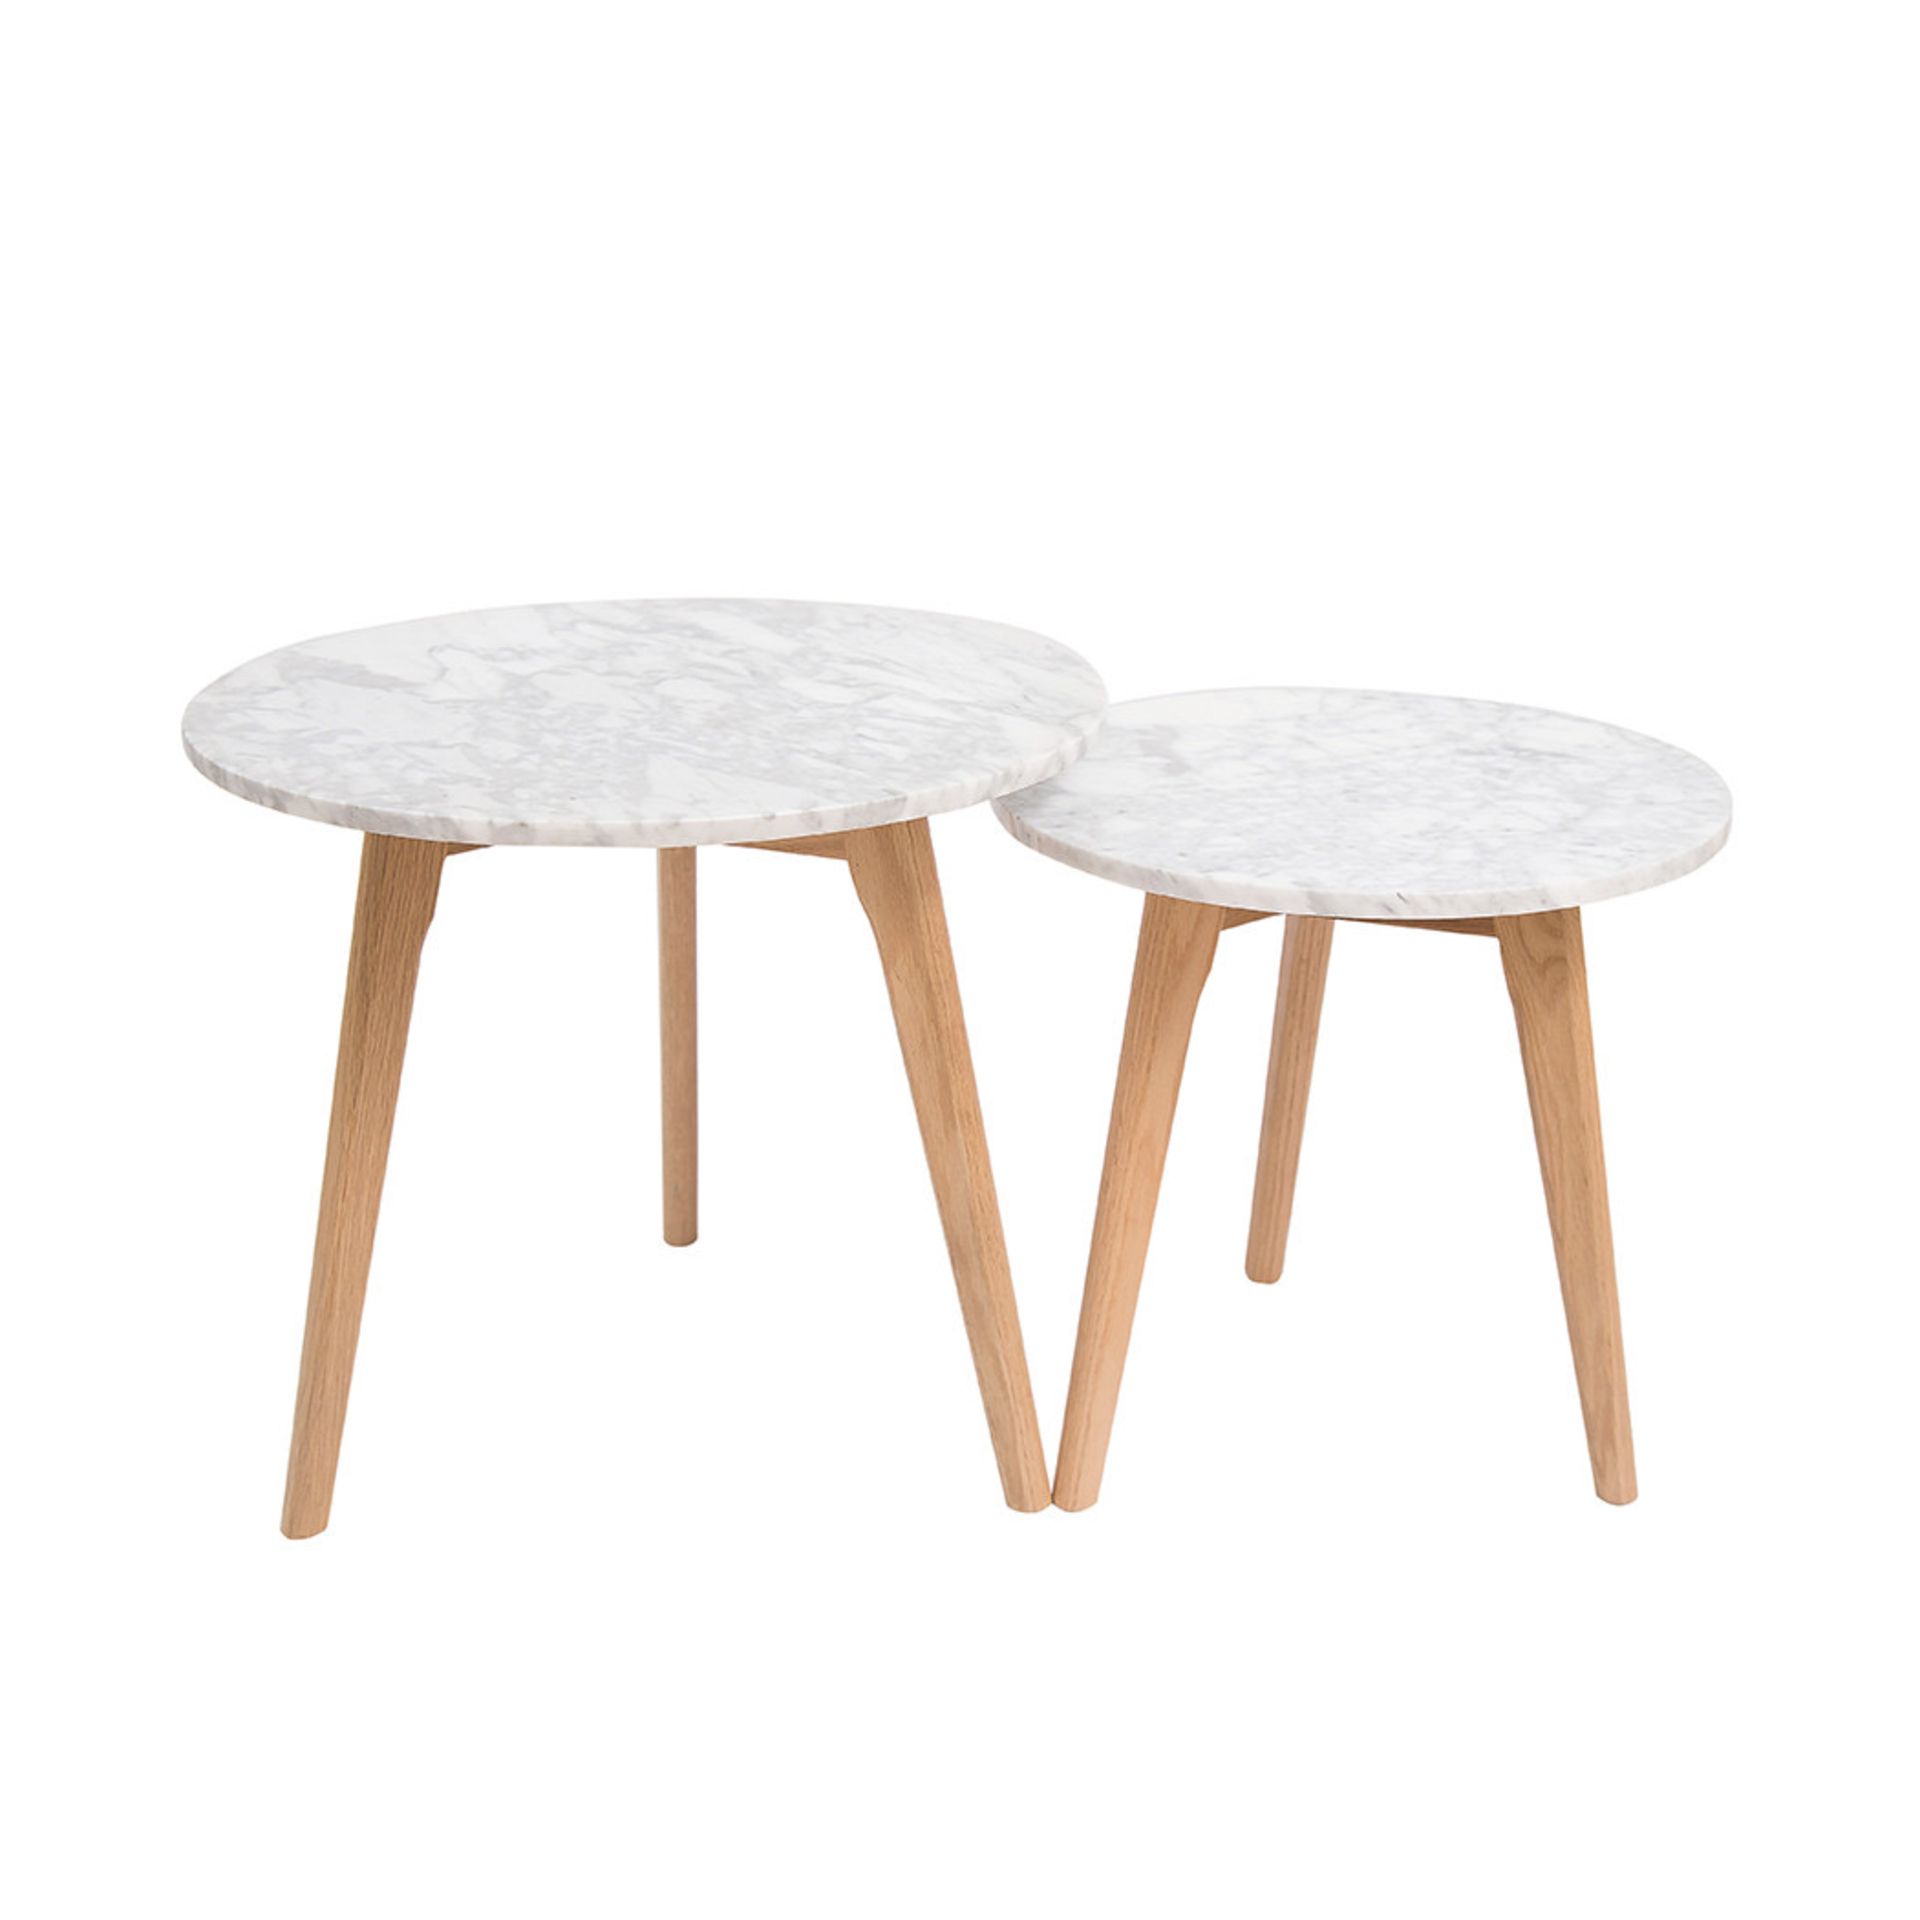 HARLOW ROUND NEST OF TWO TABLES IN MARBLE/WHITE WITH OAK LEGS - RRP £289 - Image 2 of 5